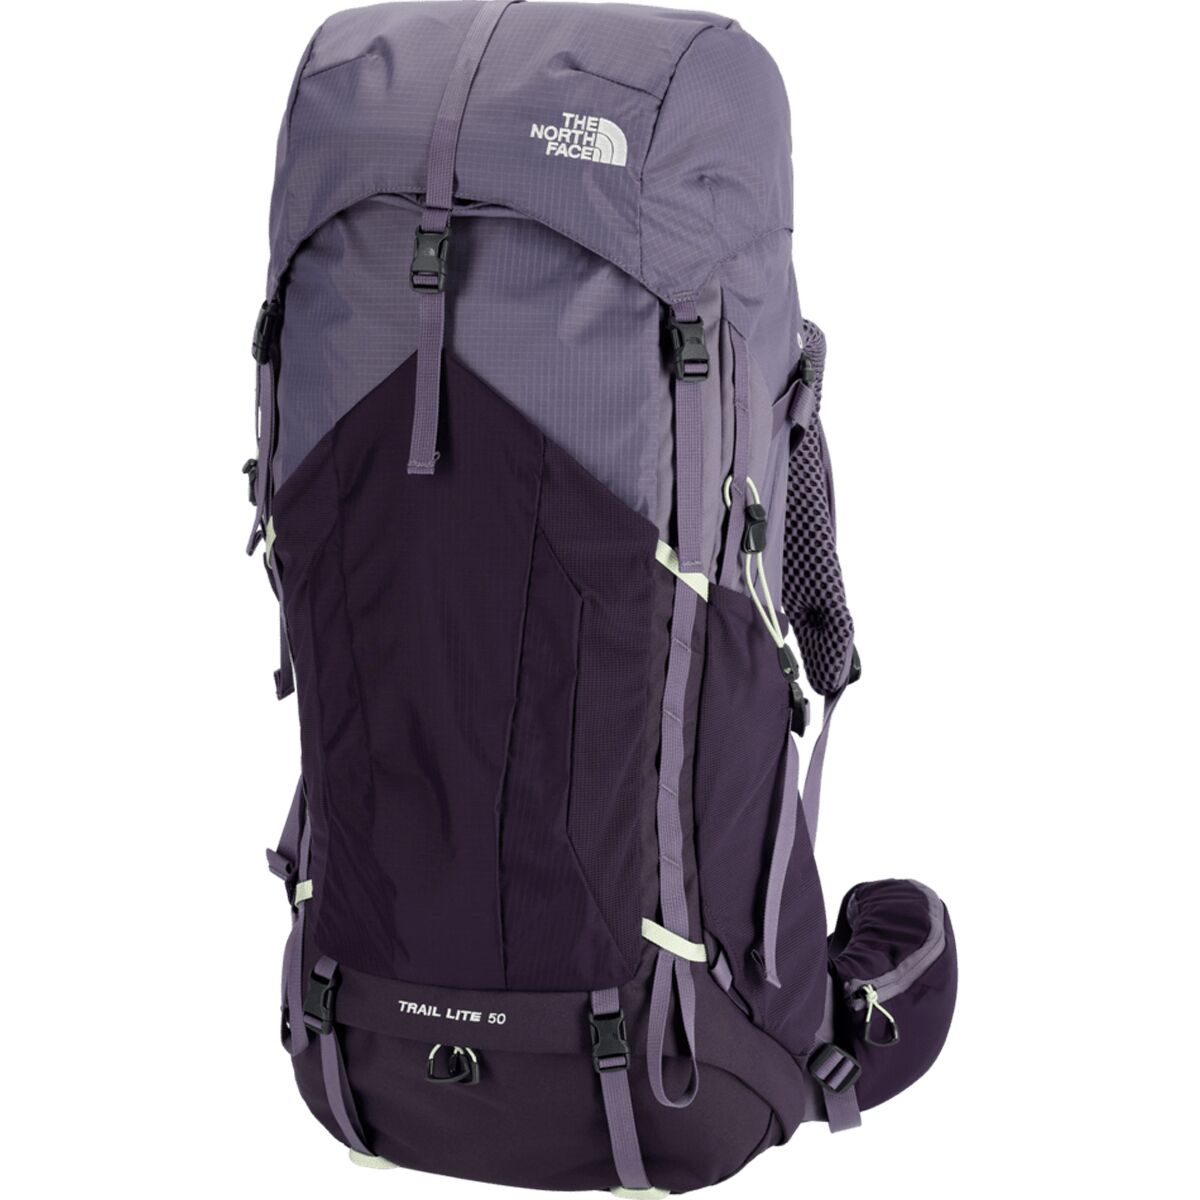 The North Face Trail Lite 50L Backpack - Women's